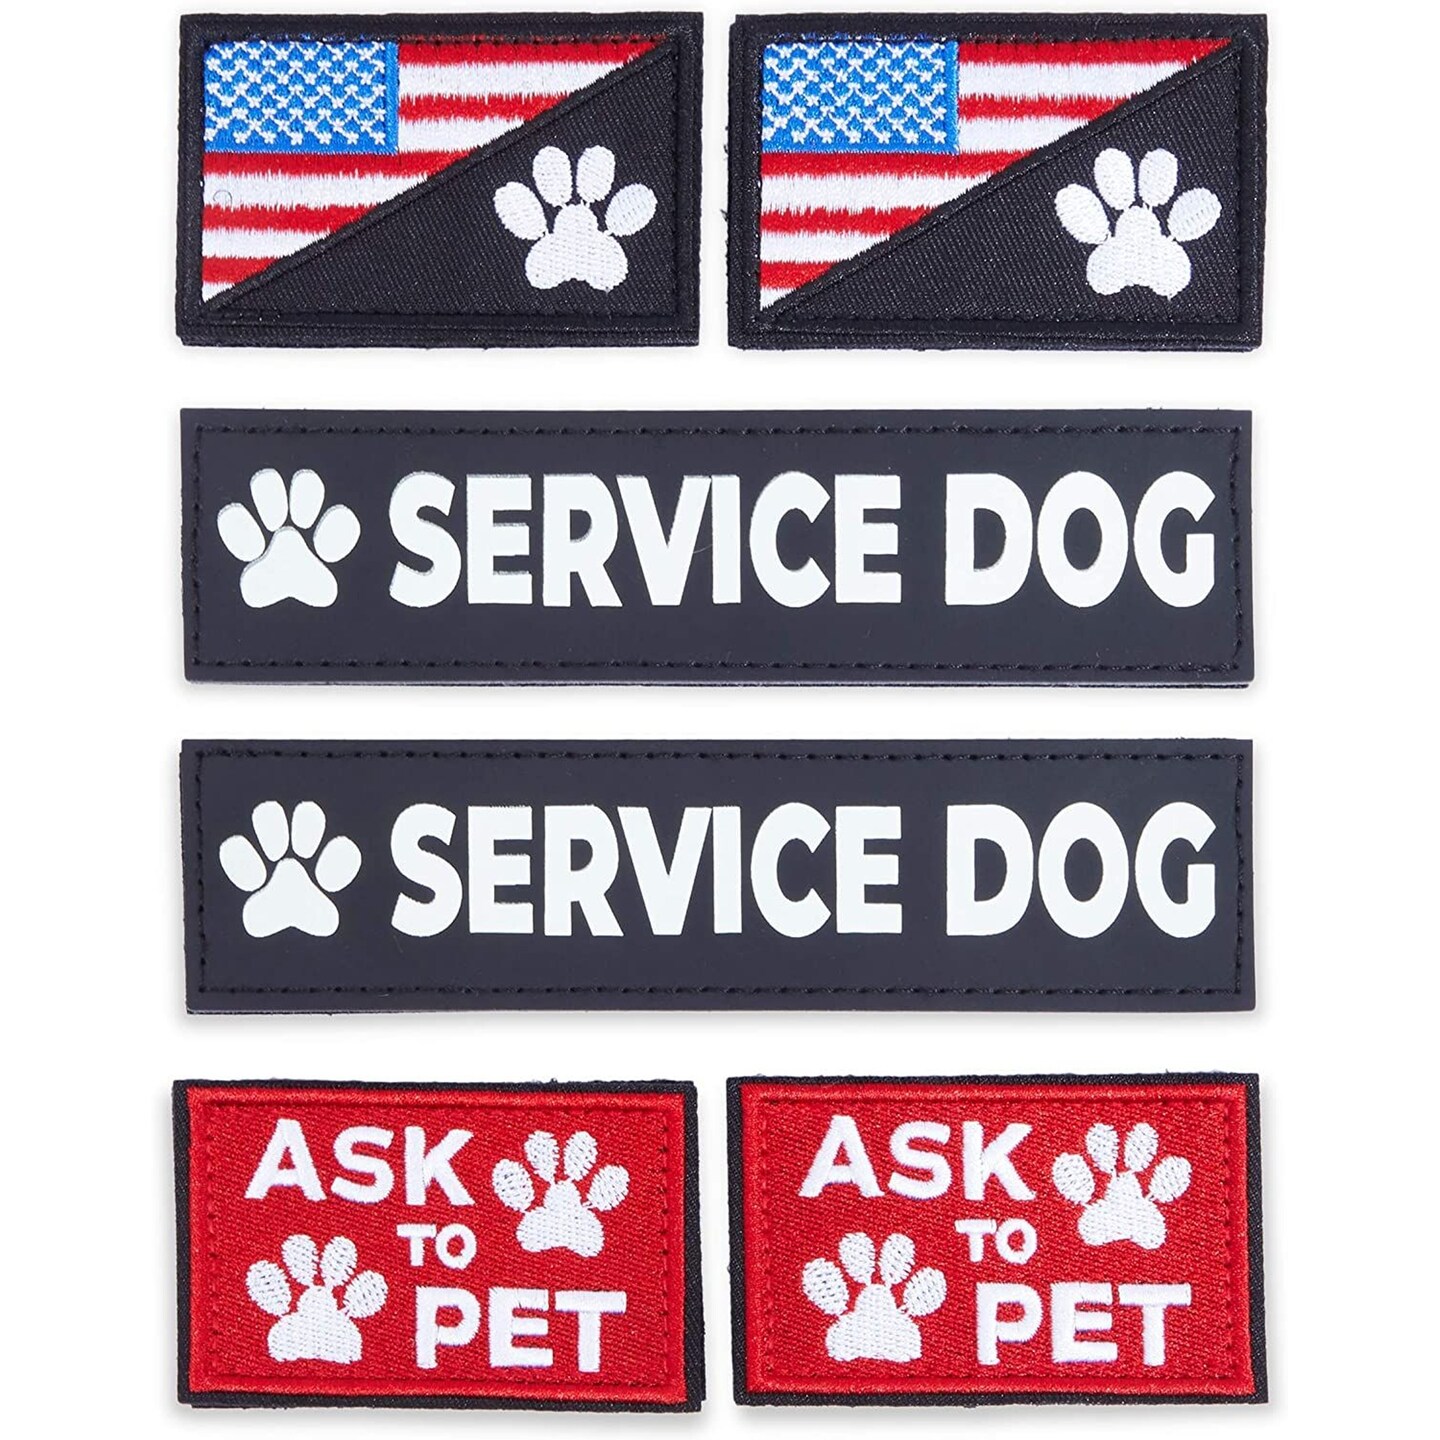 Service Dog Vest Patches, Ask to Pet Patch Set in 3 Designs (6